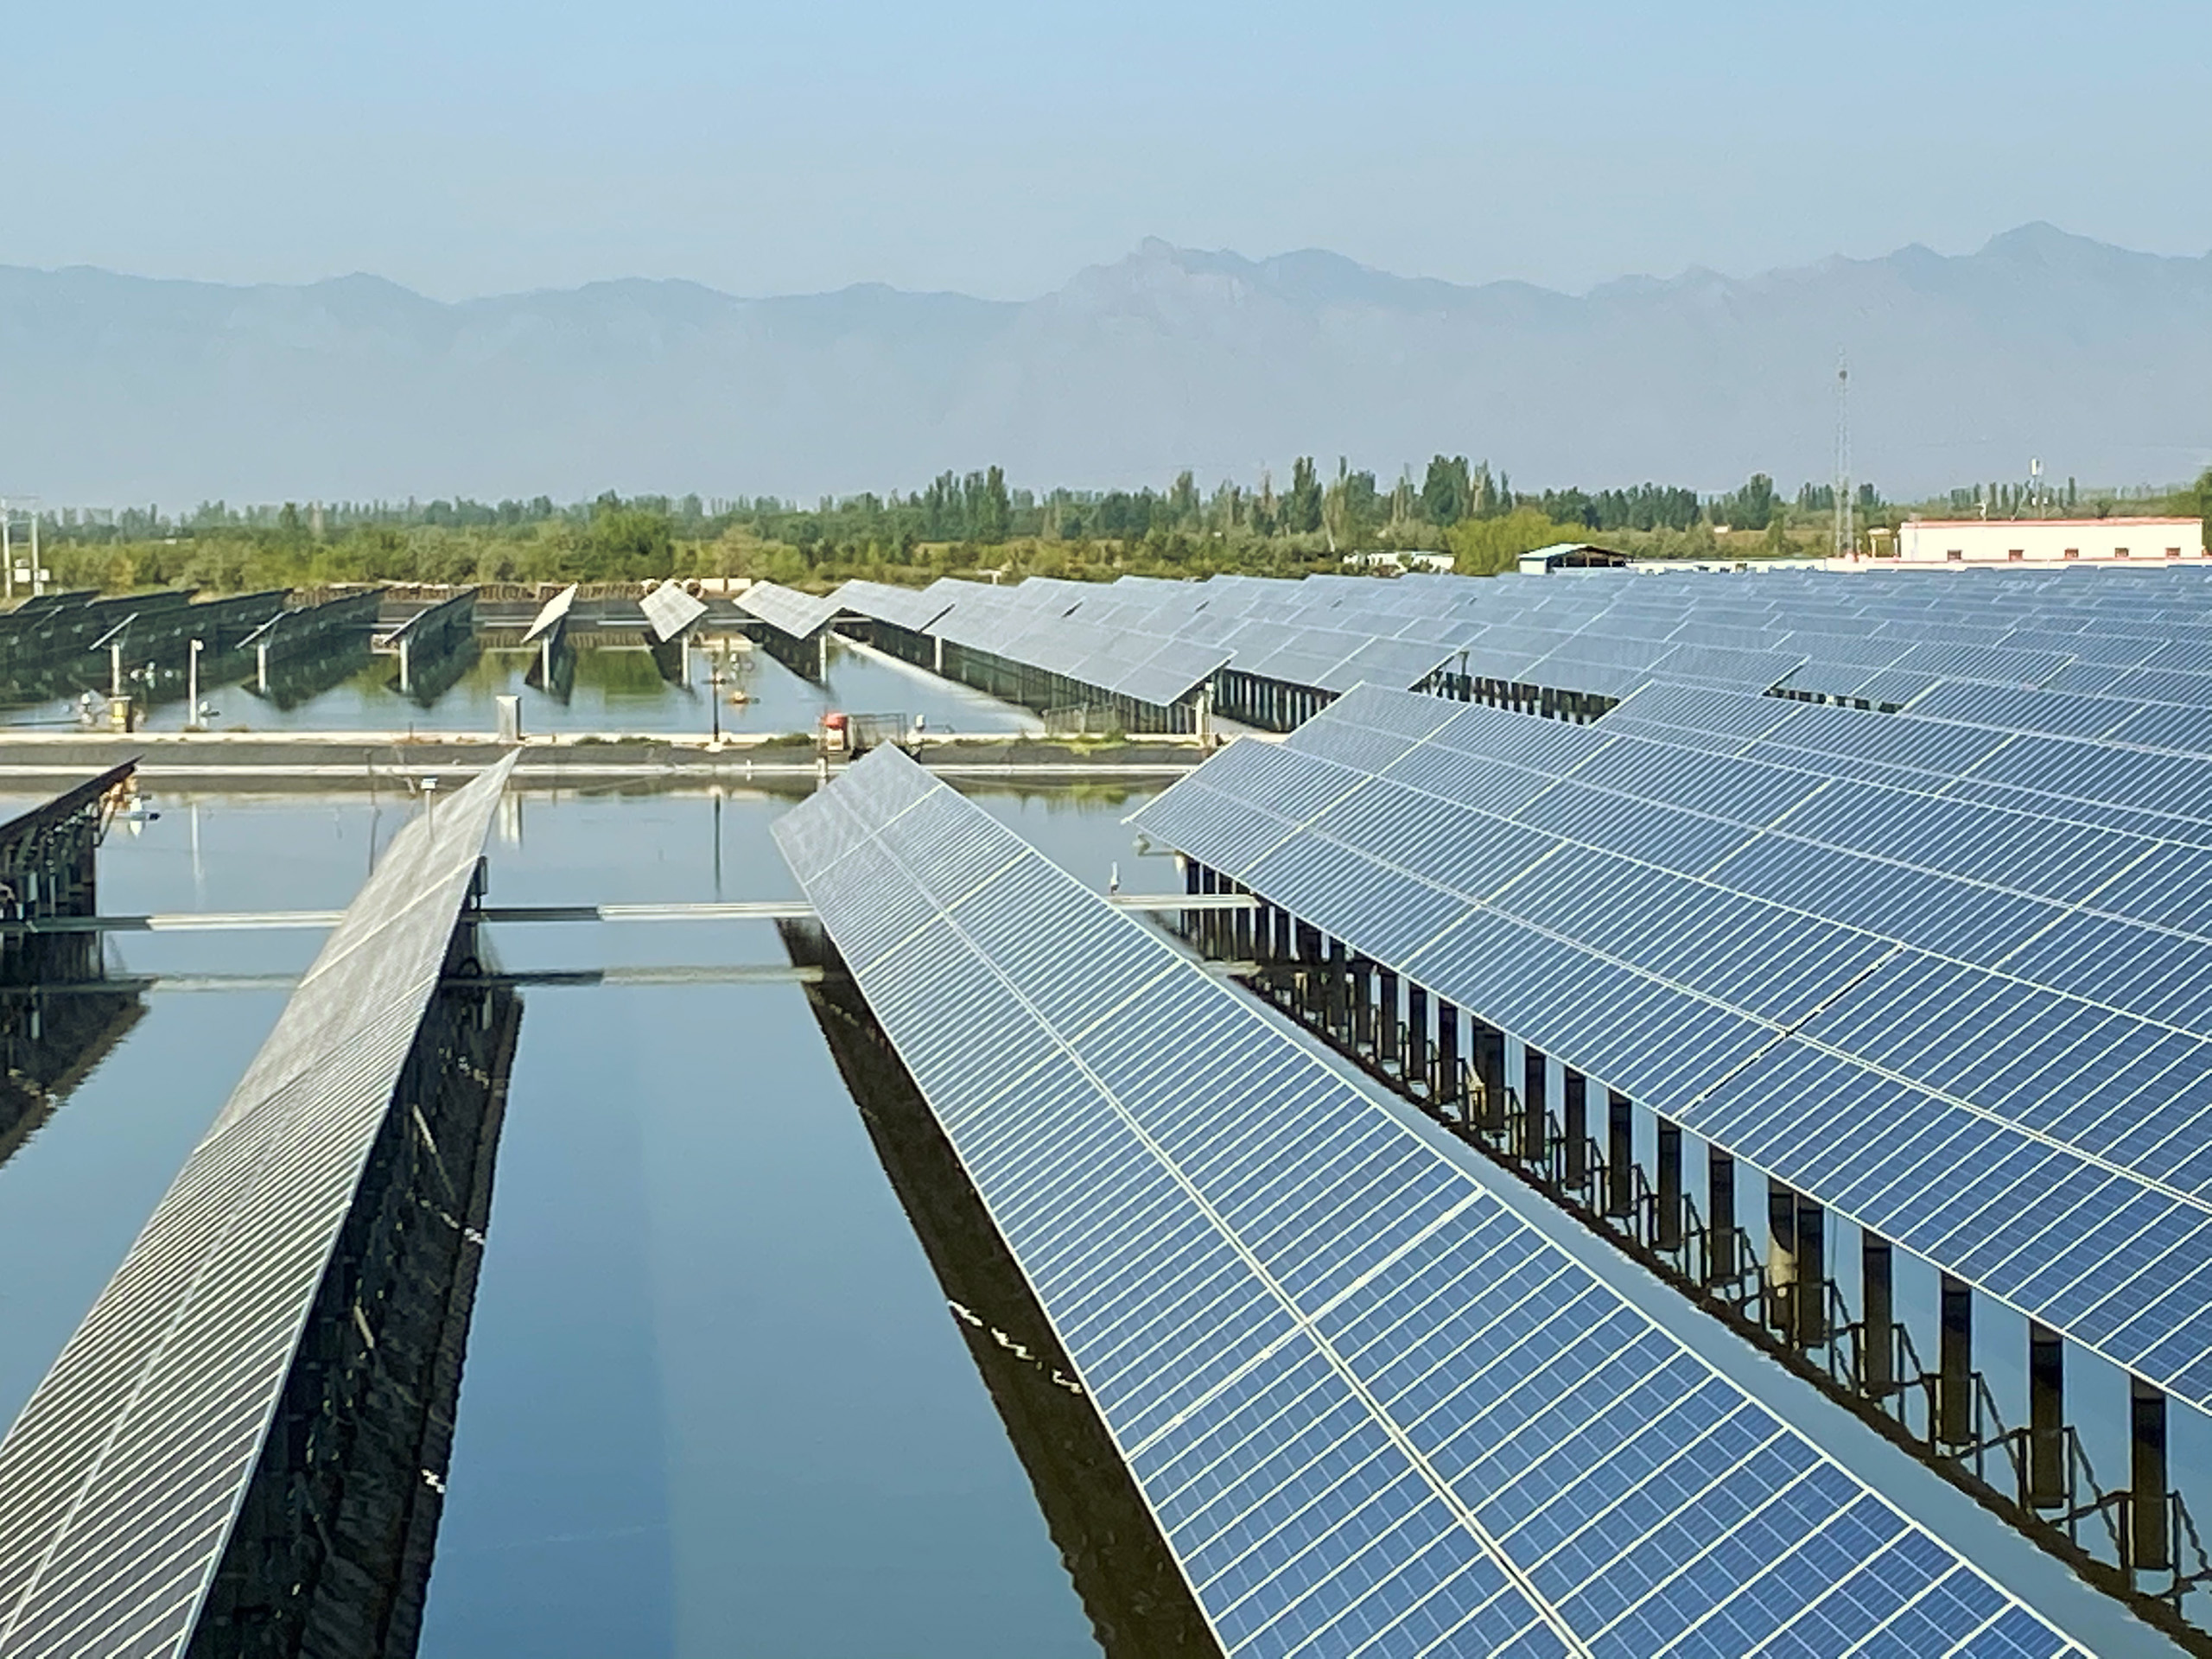 A solar and aquaculture project in Ningxia, China